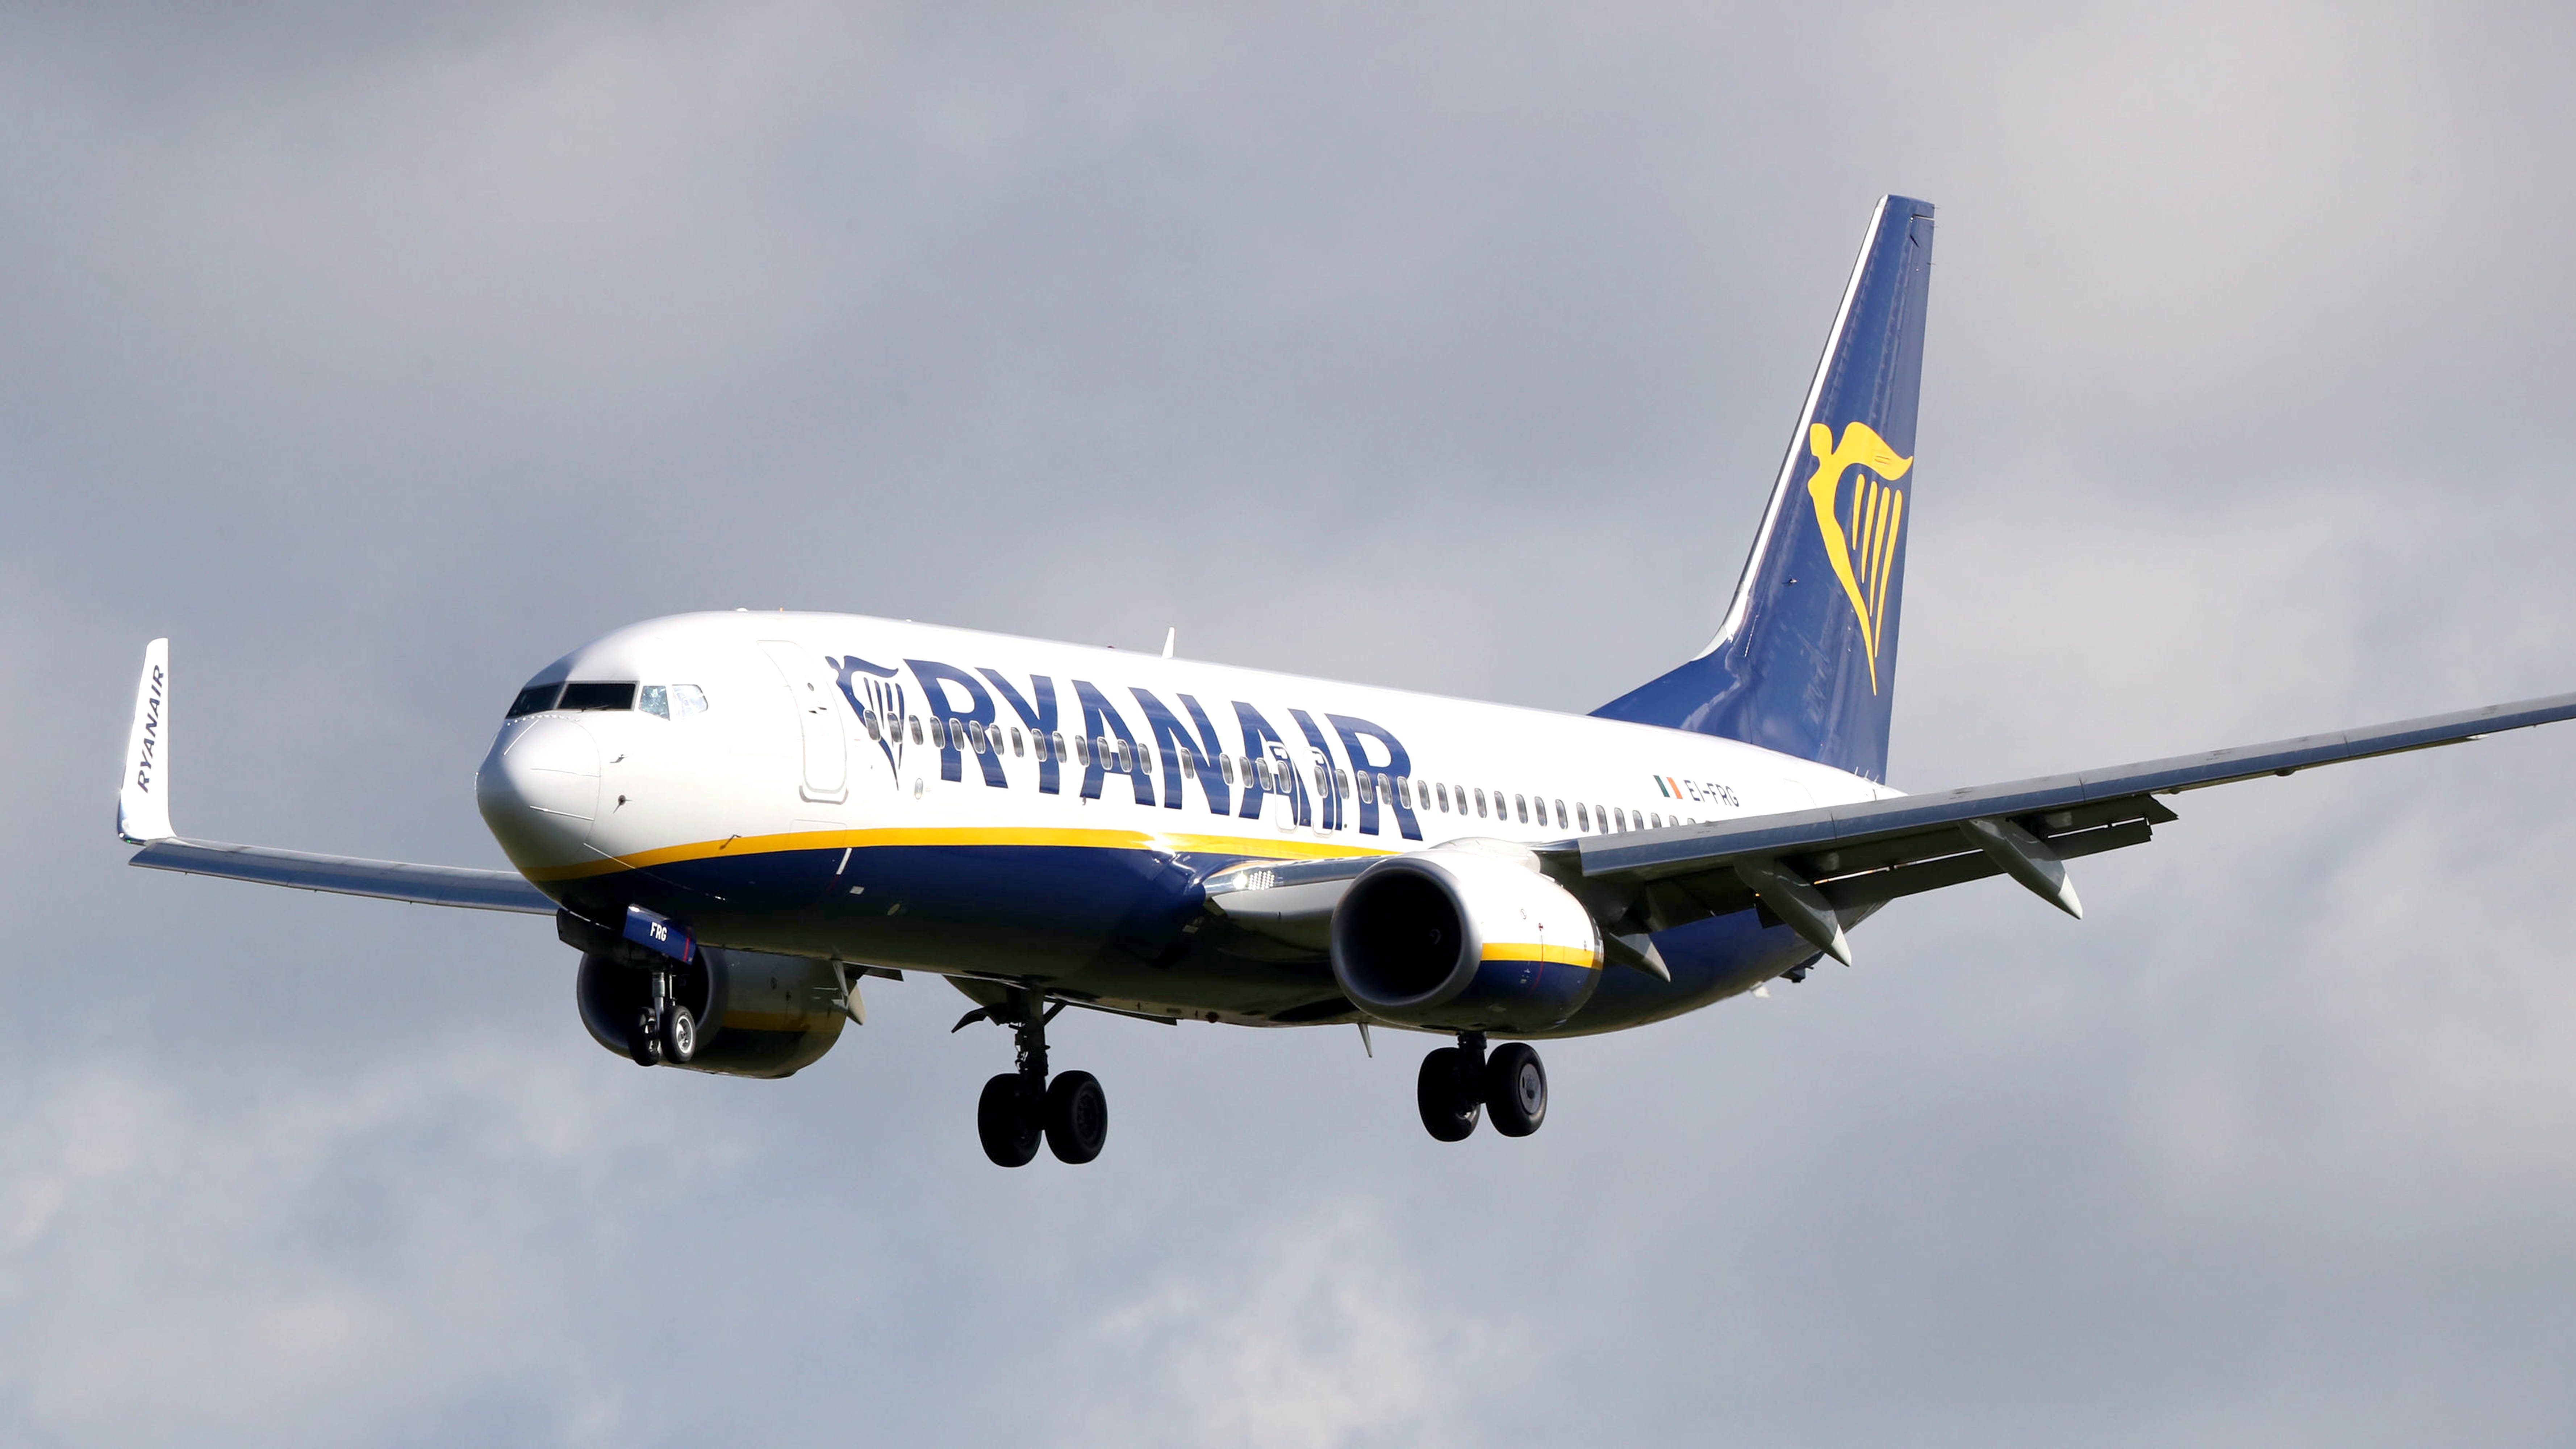 Ryanair plans to cut services over Boeing 737 crisis